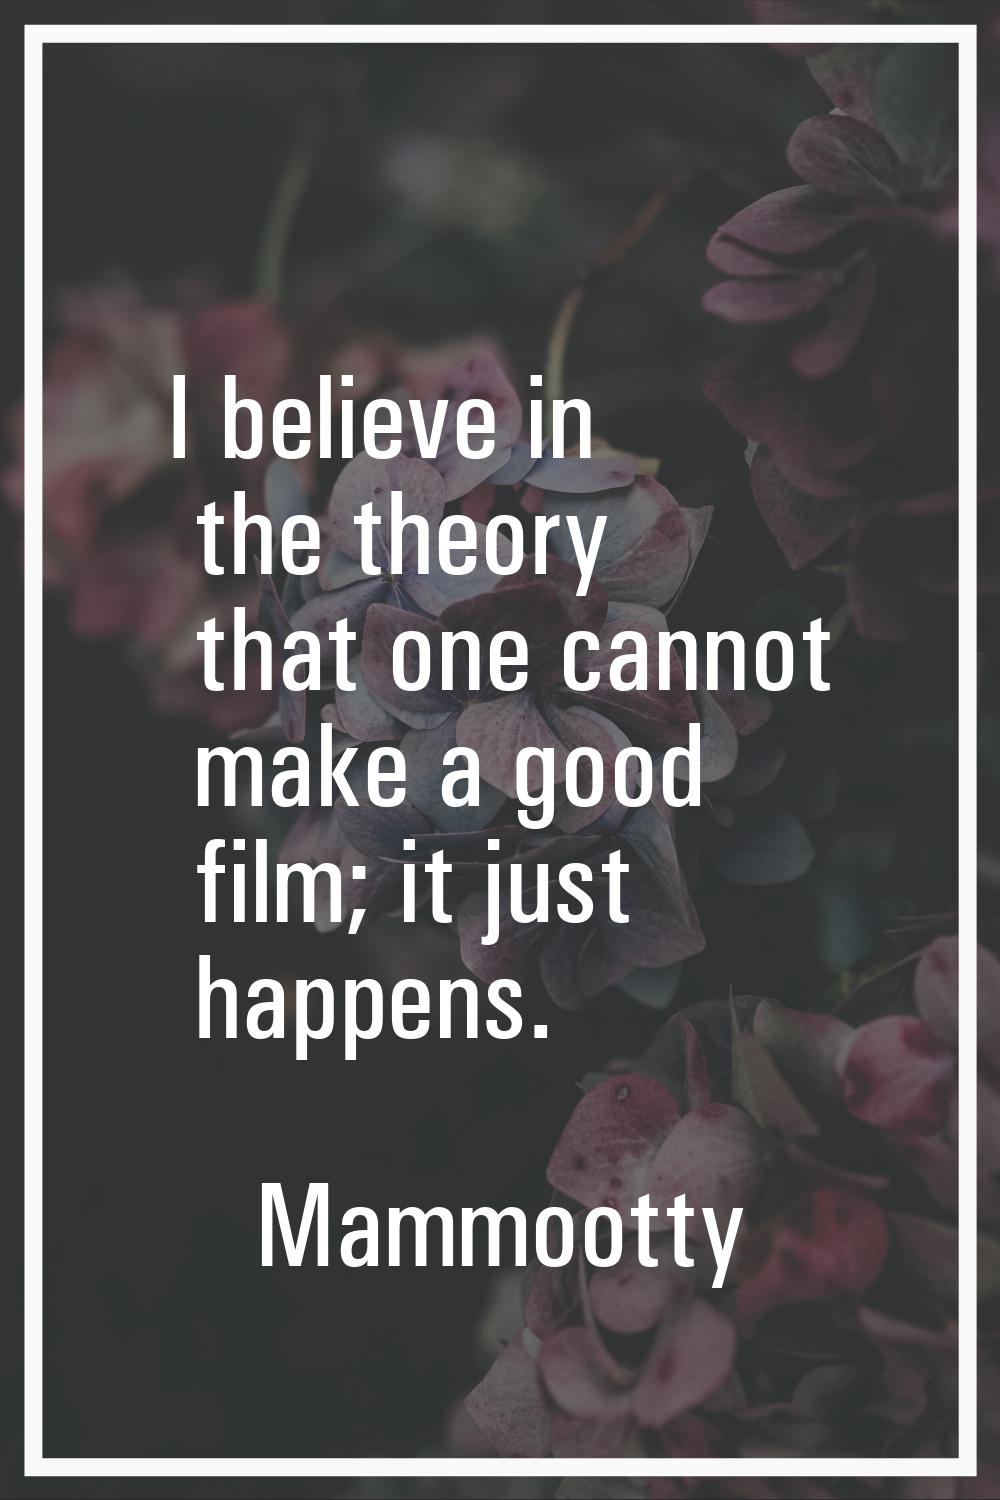 I believe in the theory that one cannot make a good film; it just happens.